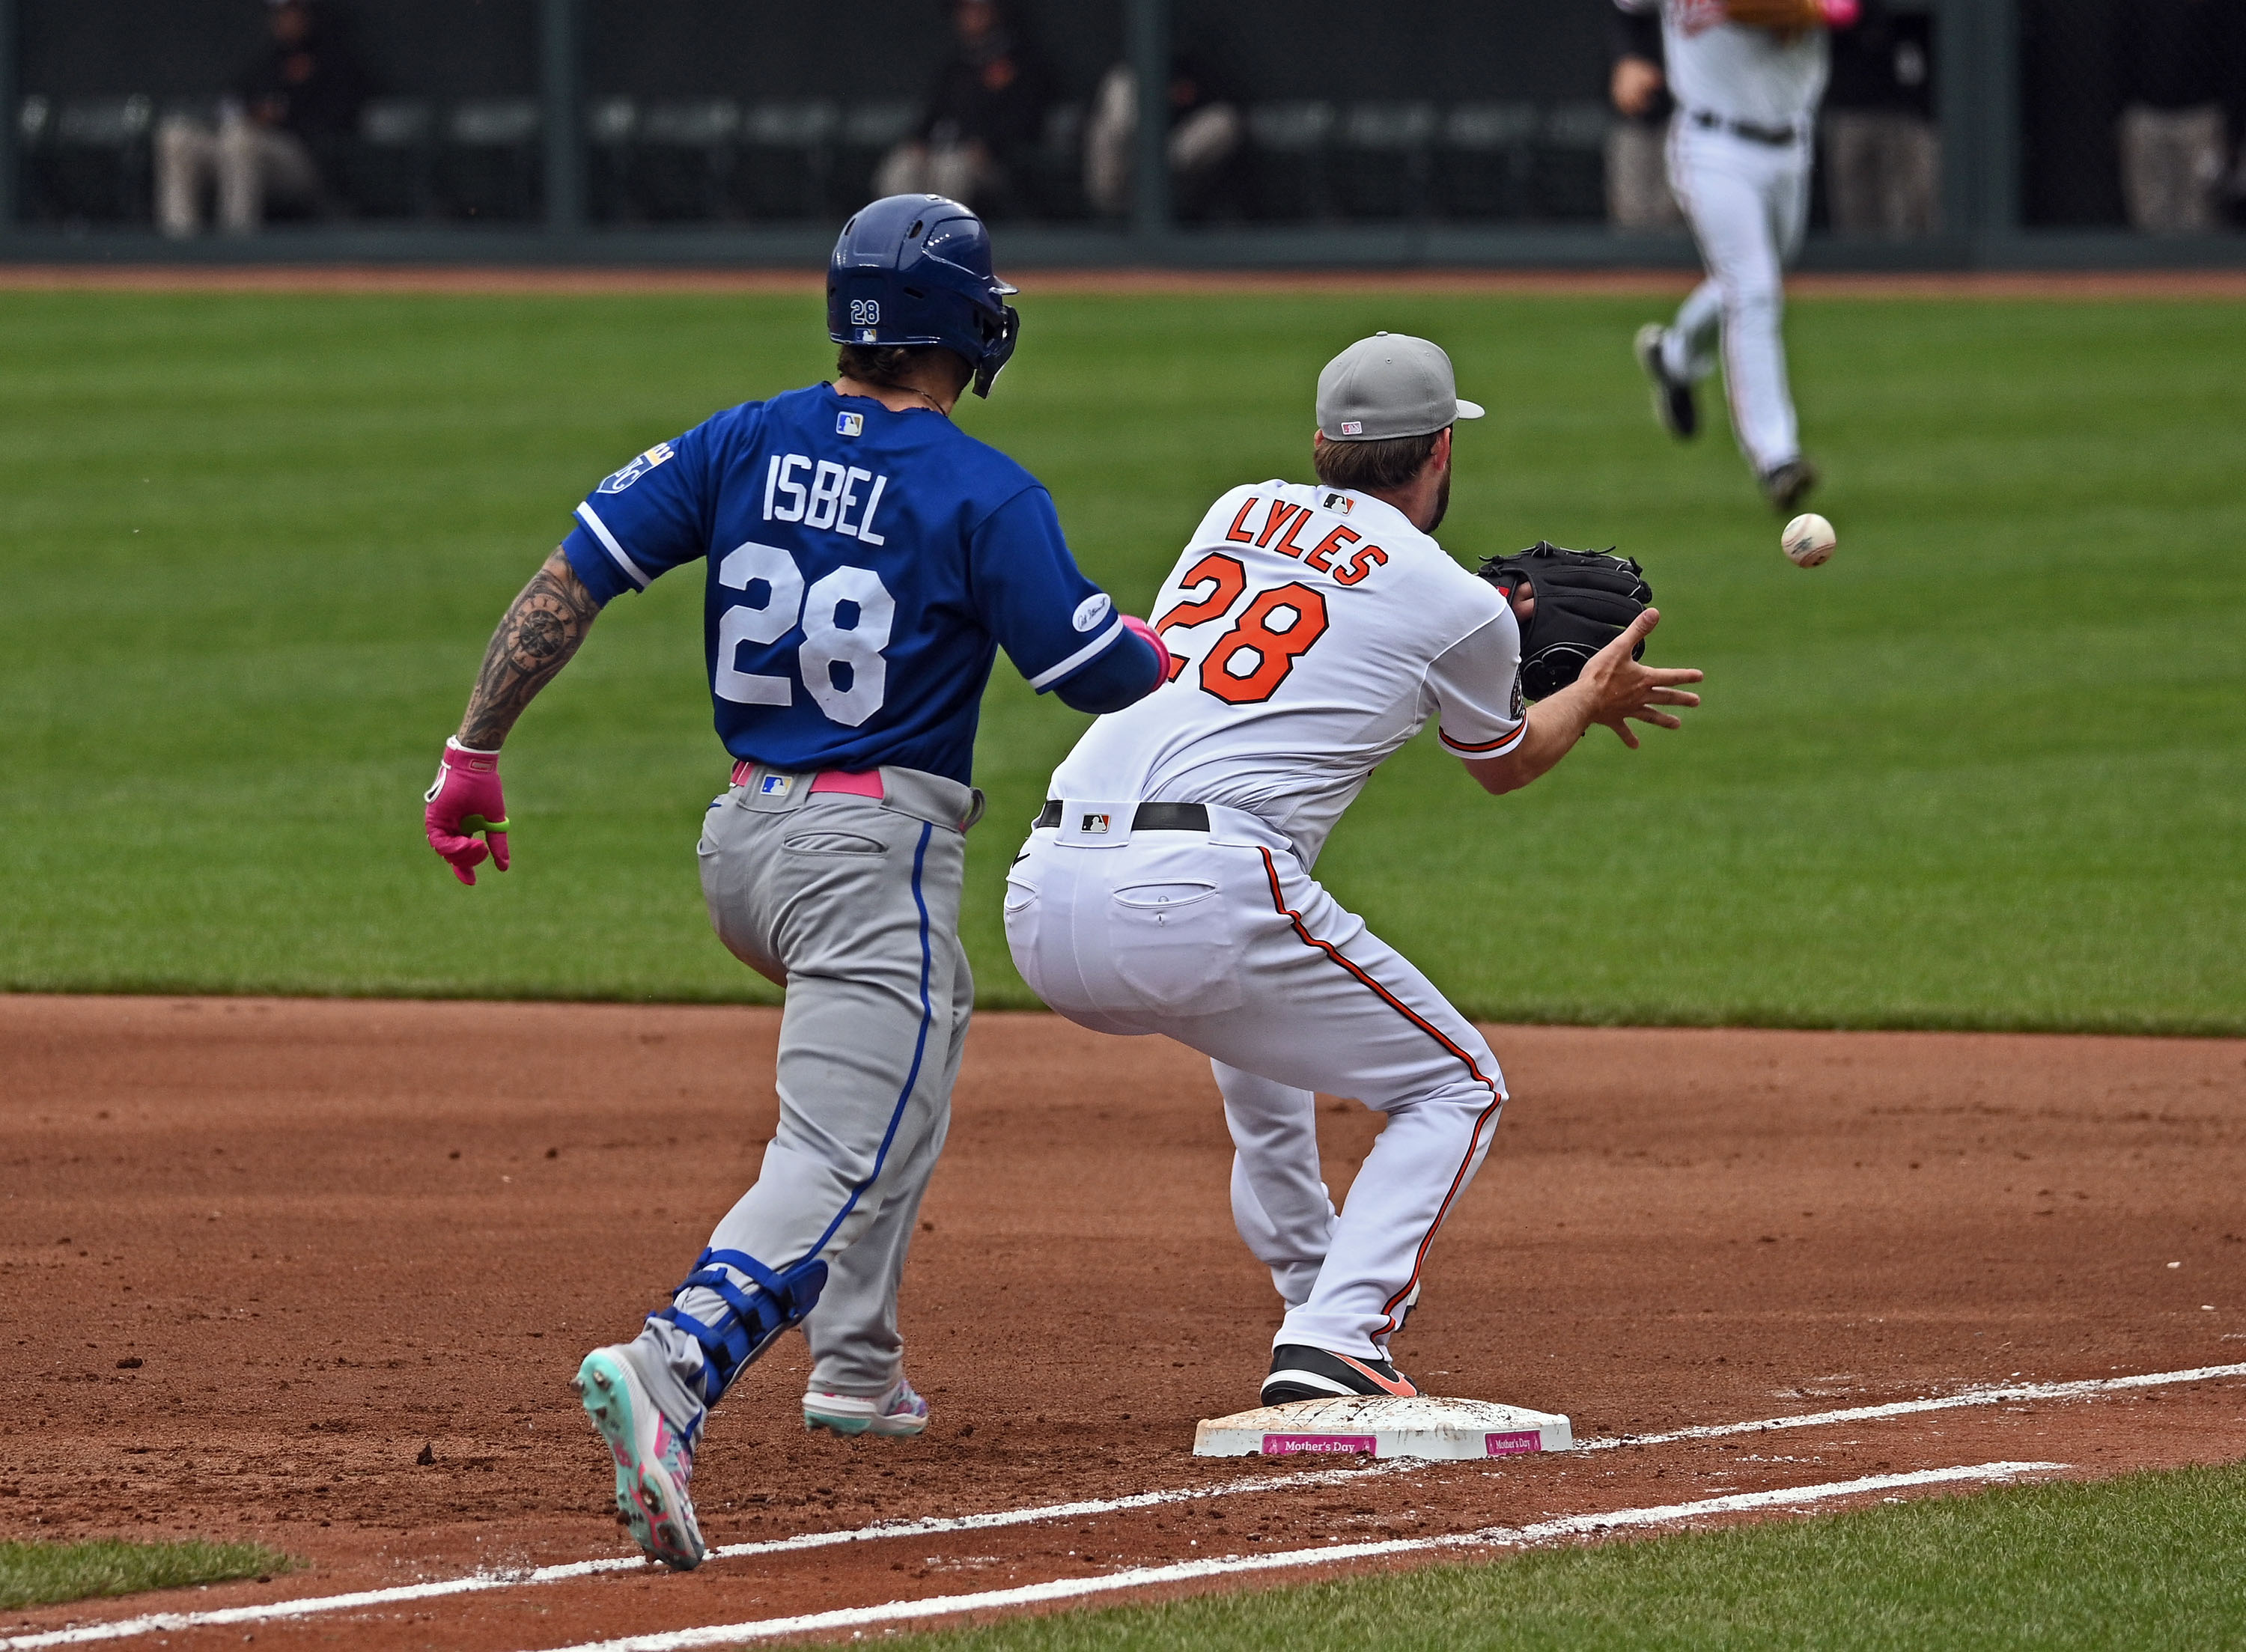 Orioles vs. Royals, second doubleheader game, May 8, 2022